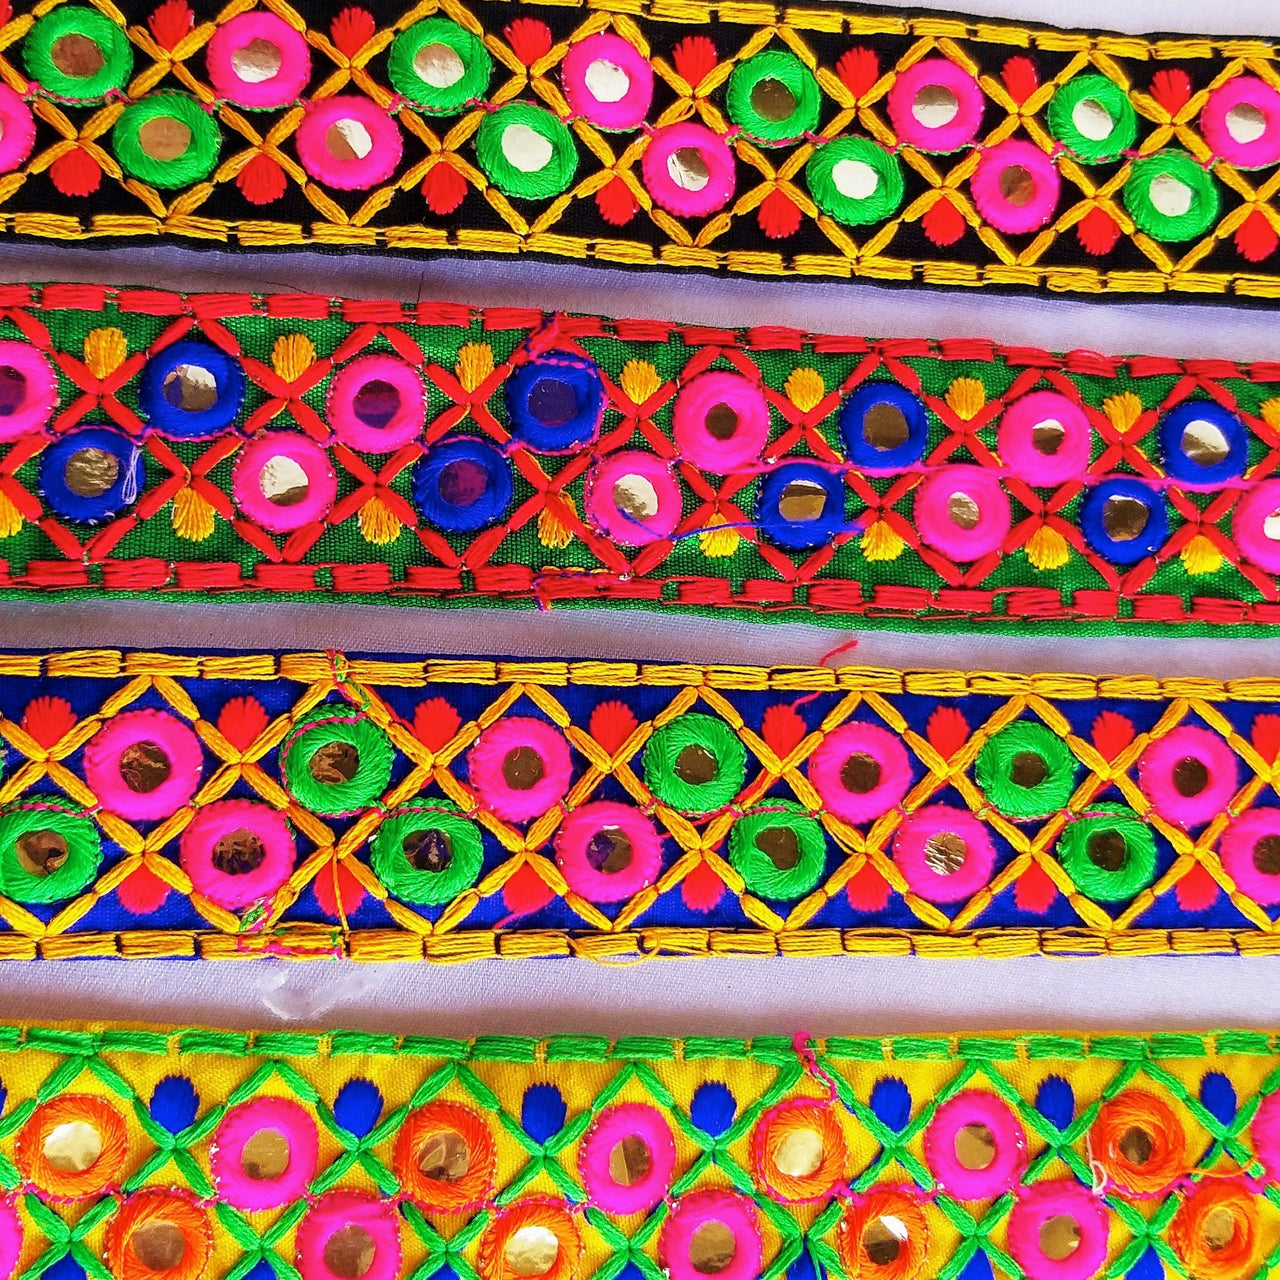 Blue Cotton Fabric Mirrored Trim With Embroidery In Fuchsia Pink, Green, Red & Yellow Threads